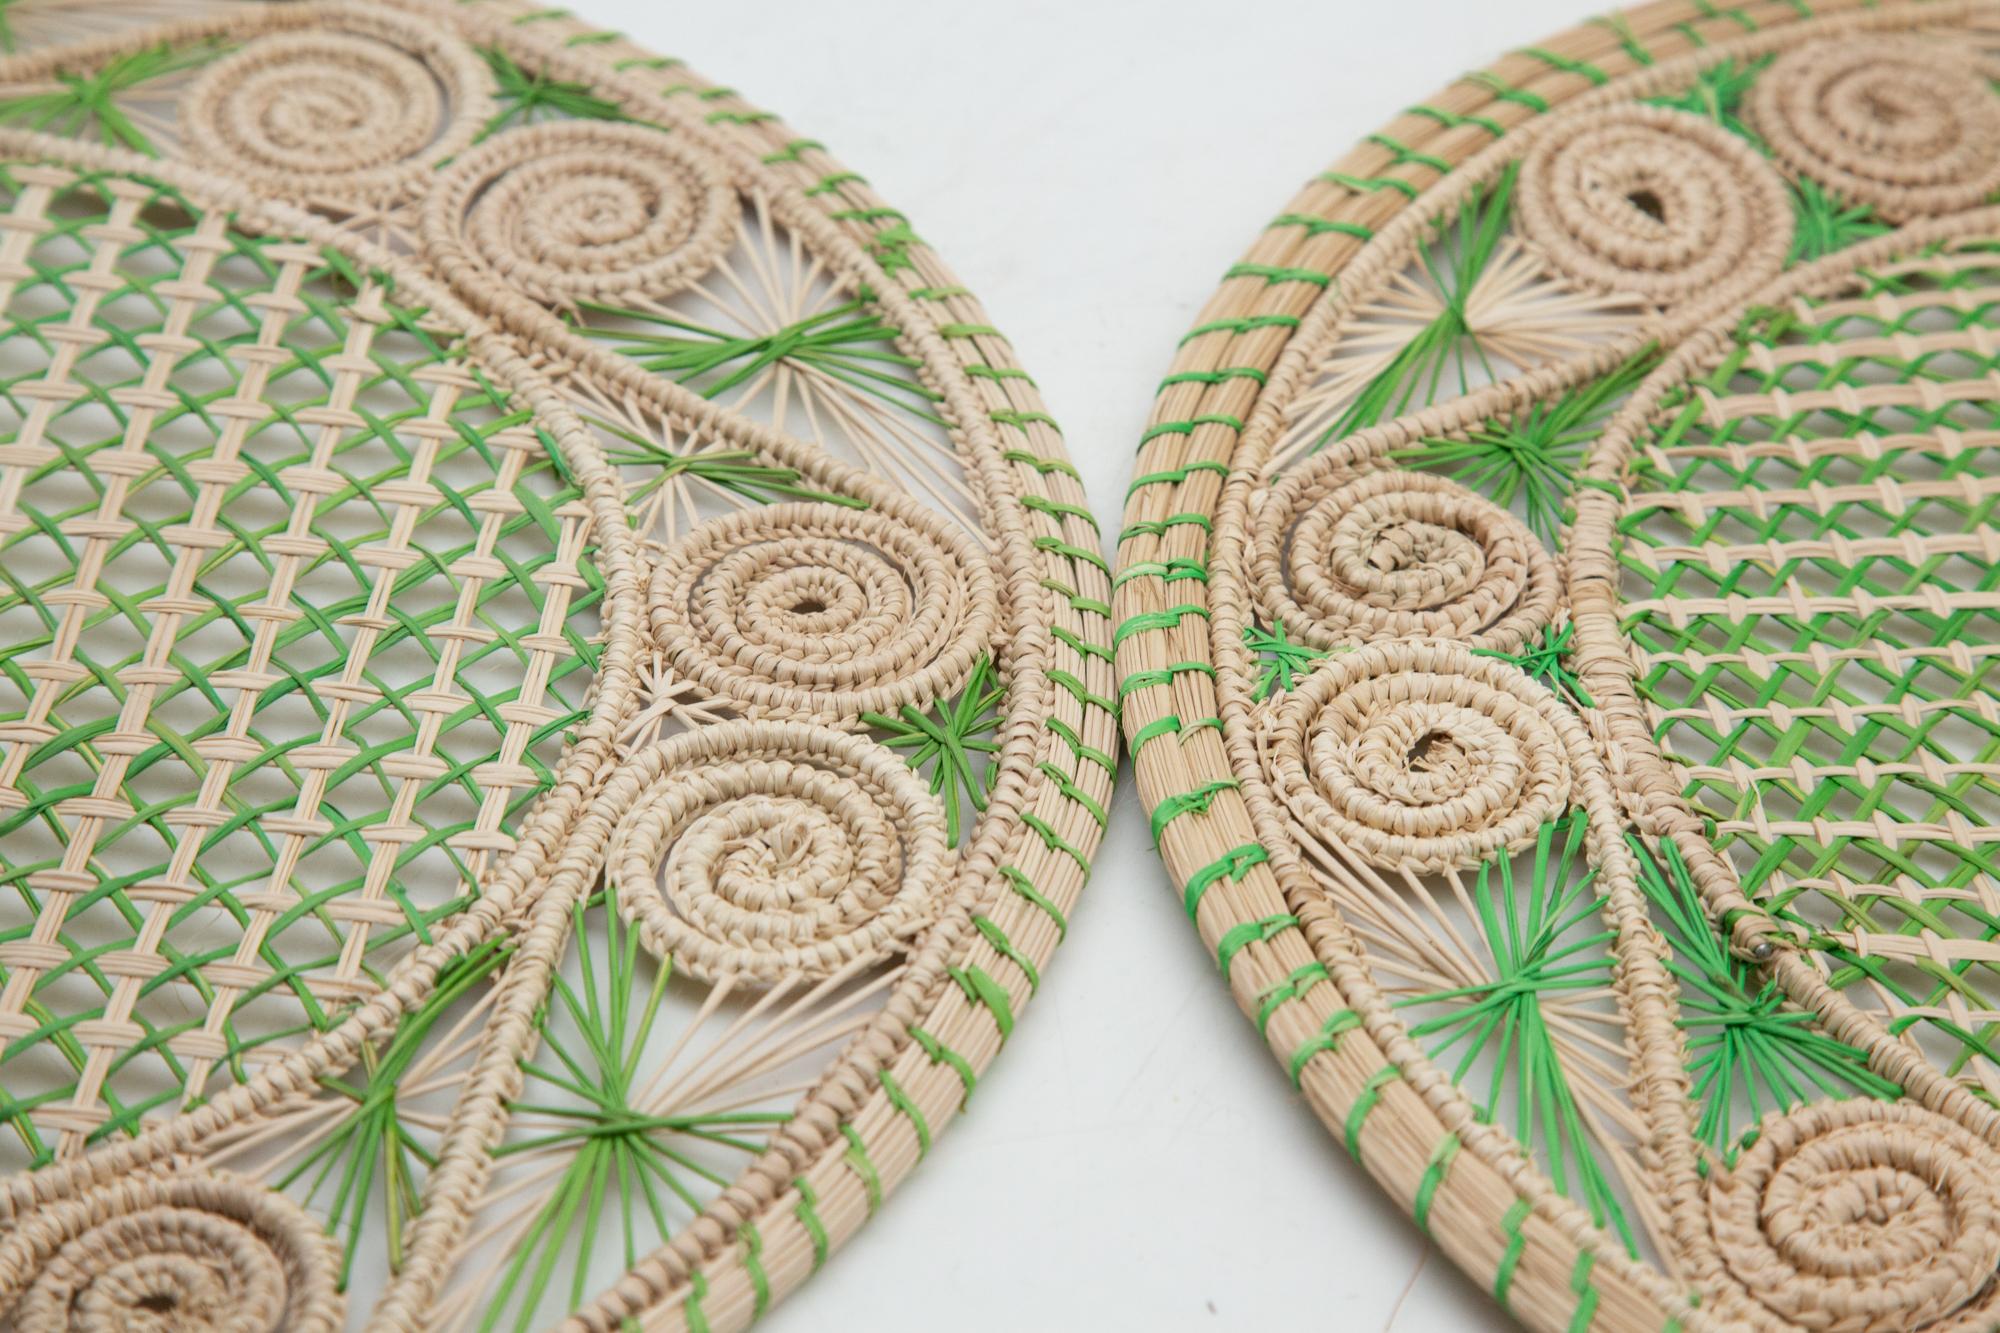 Straw Set of 8 Green and Cream Round Iraca Fibre Placemats